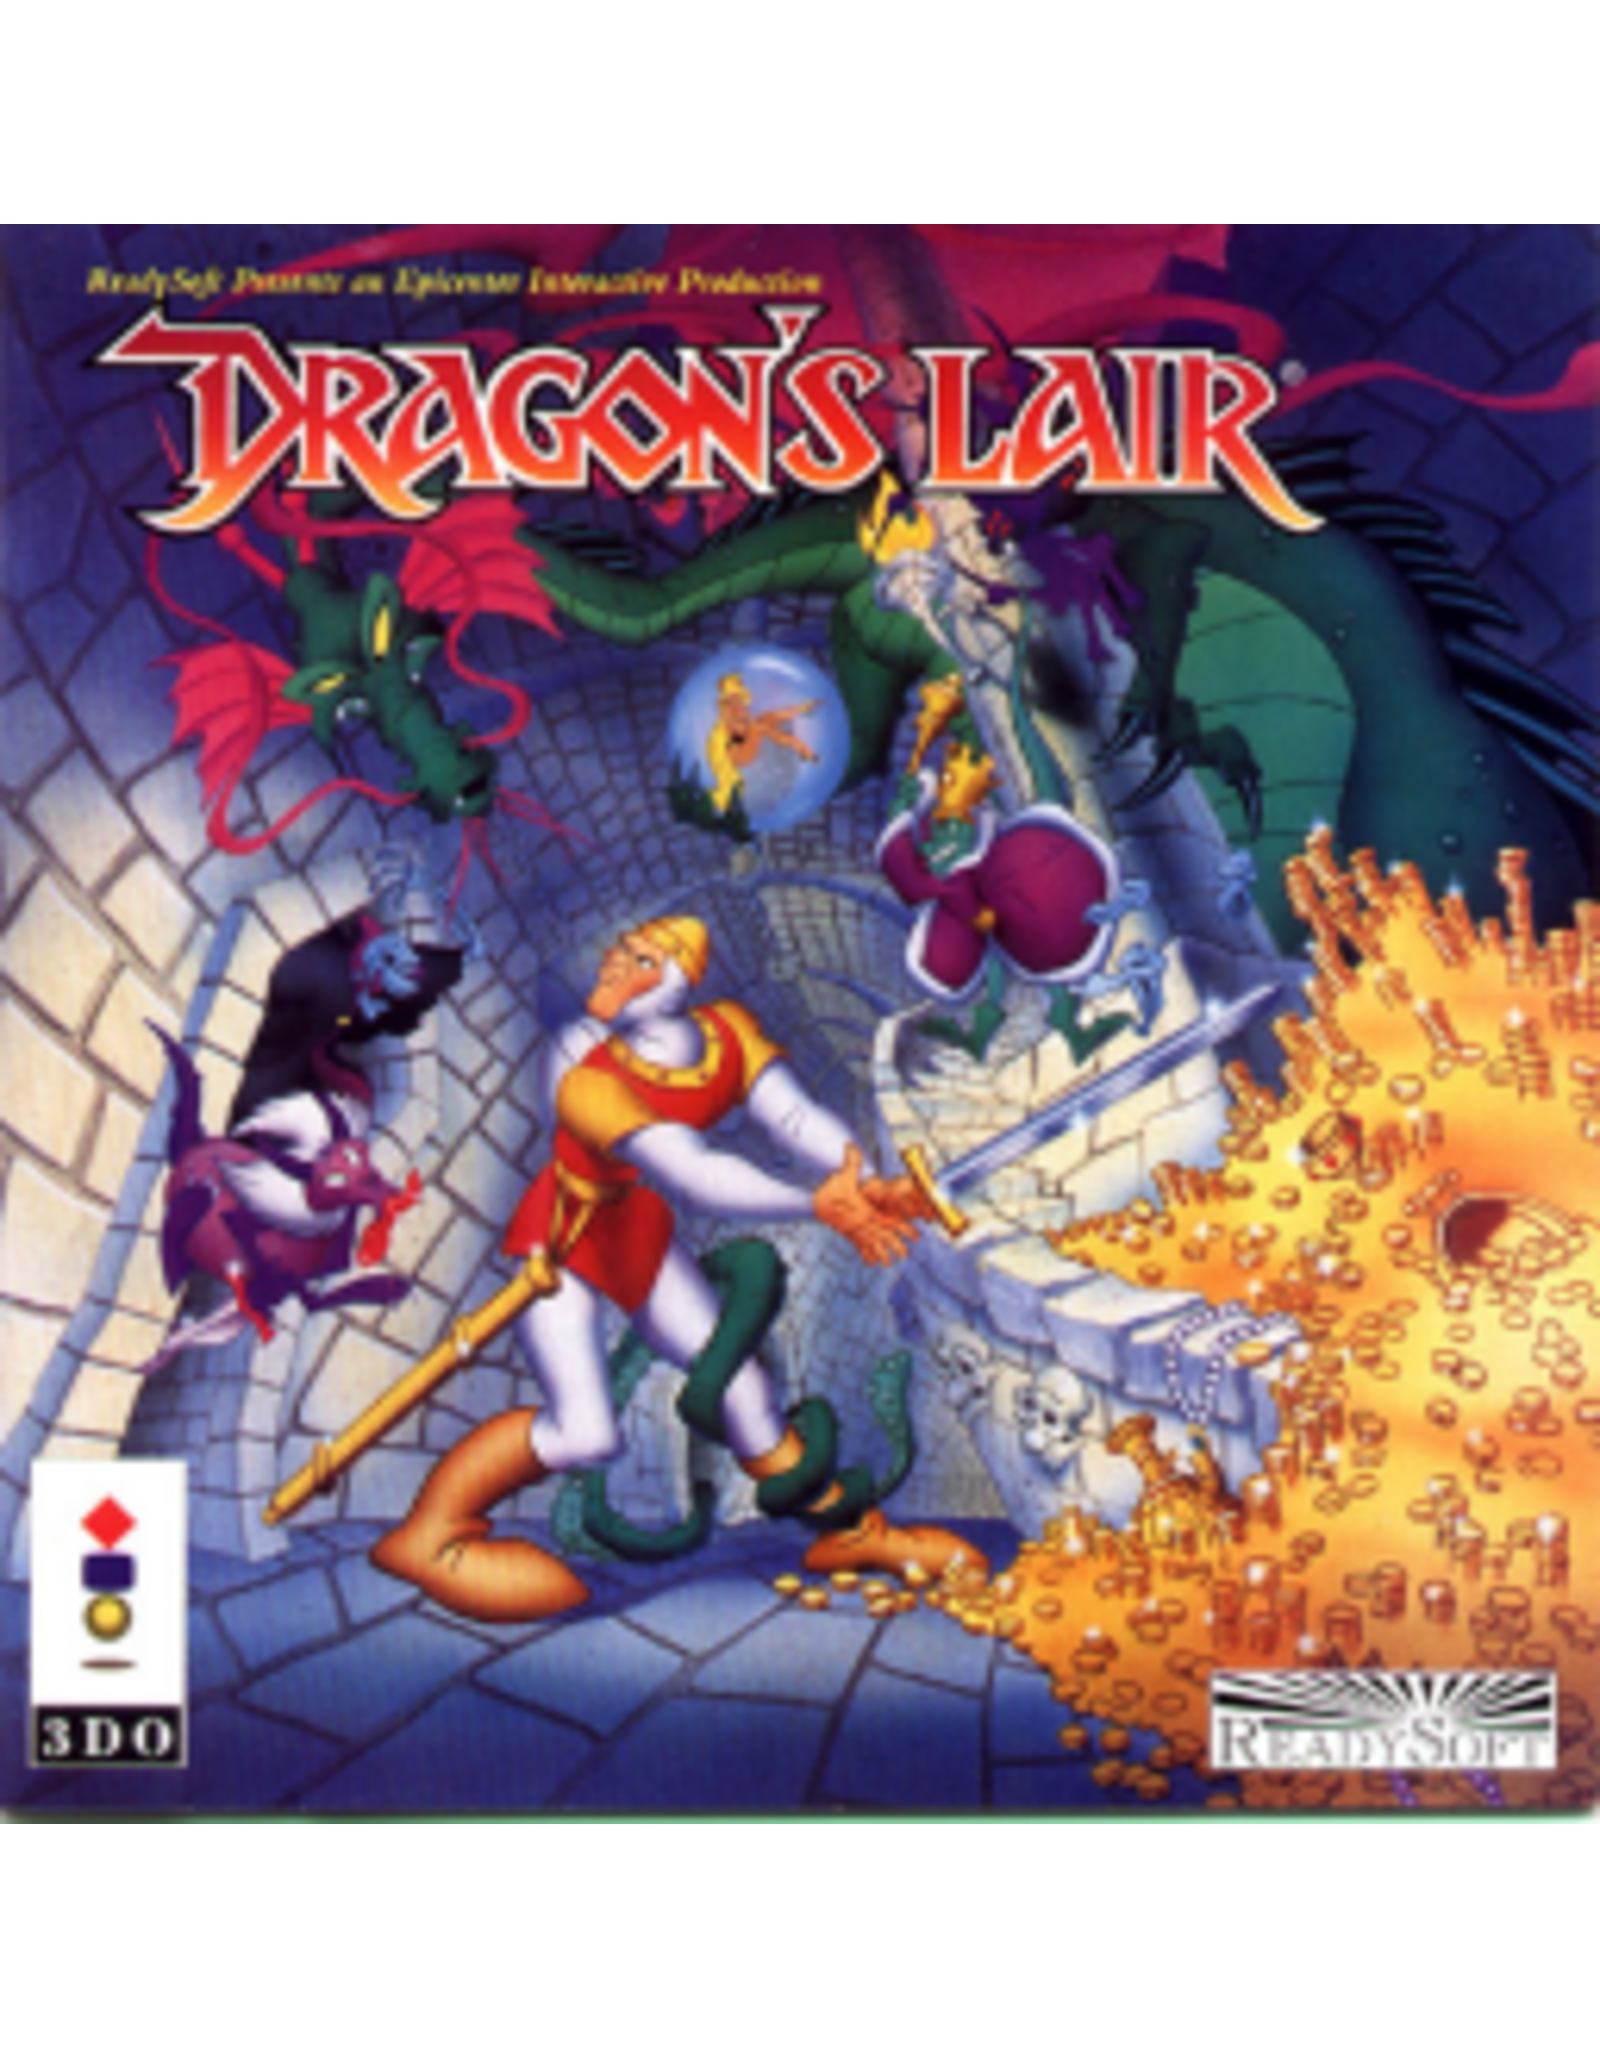 Panasonic 3DO Dragon's Lair (Standard Jewel Case Size, Game and Manual Only)